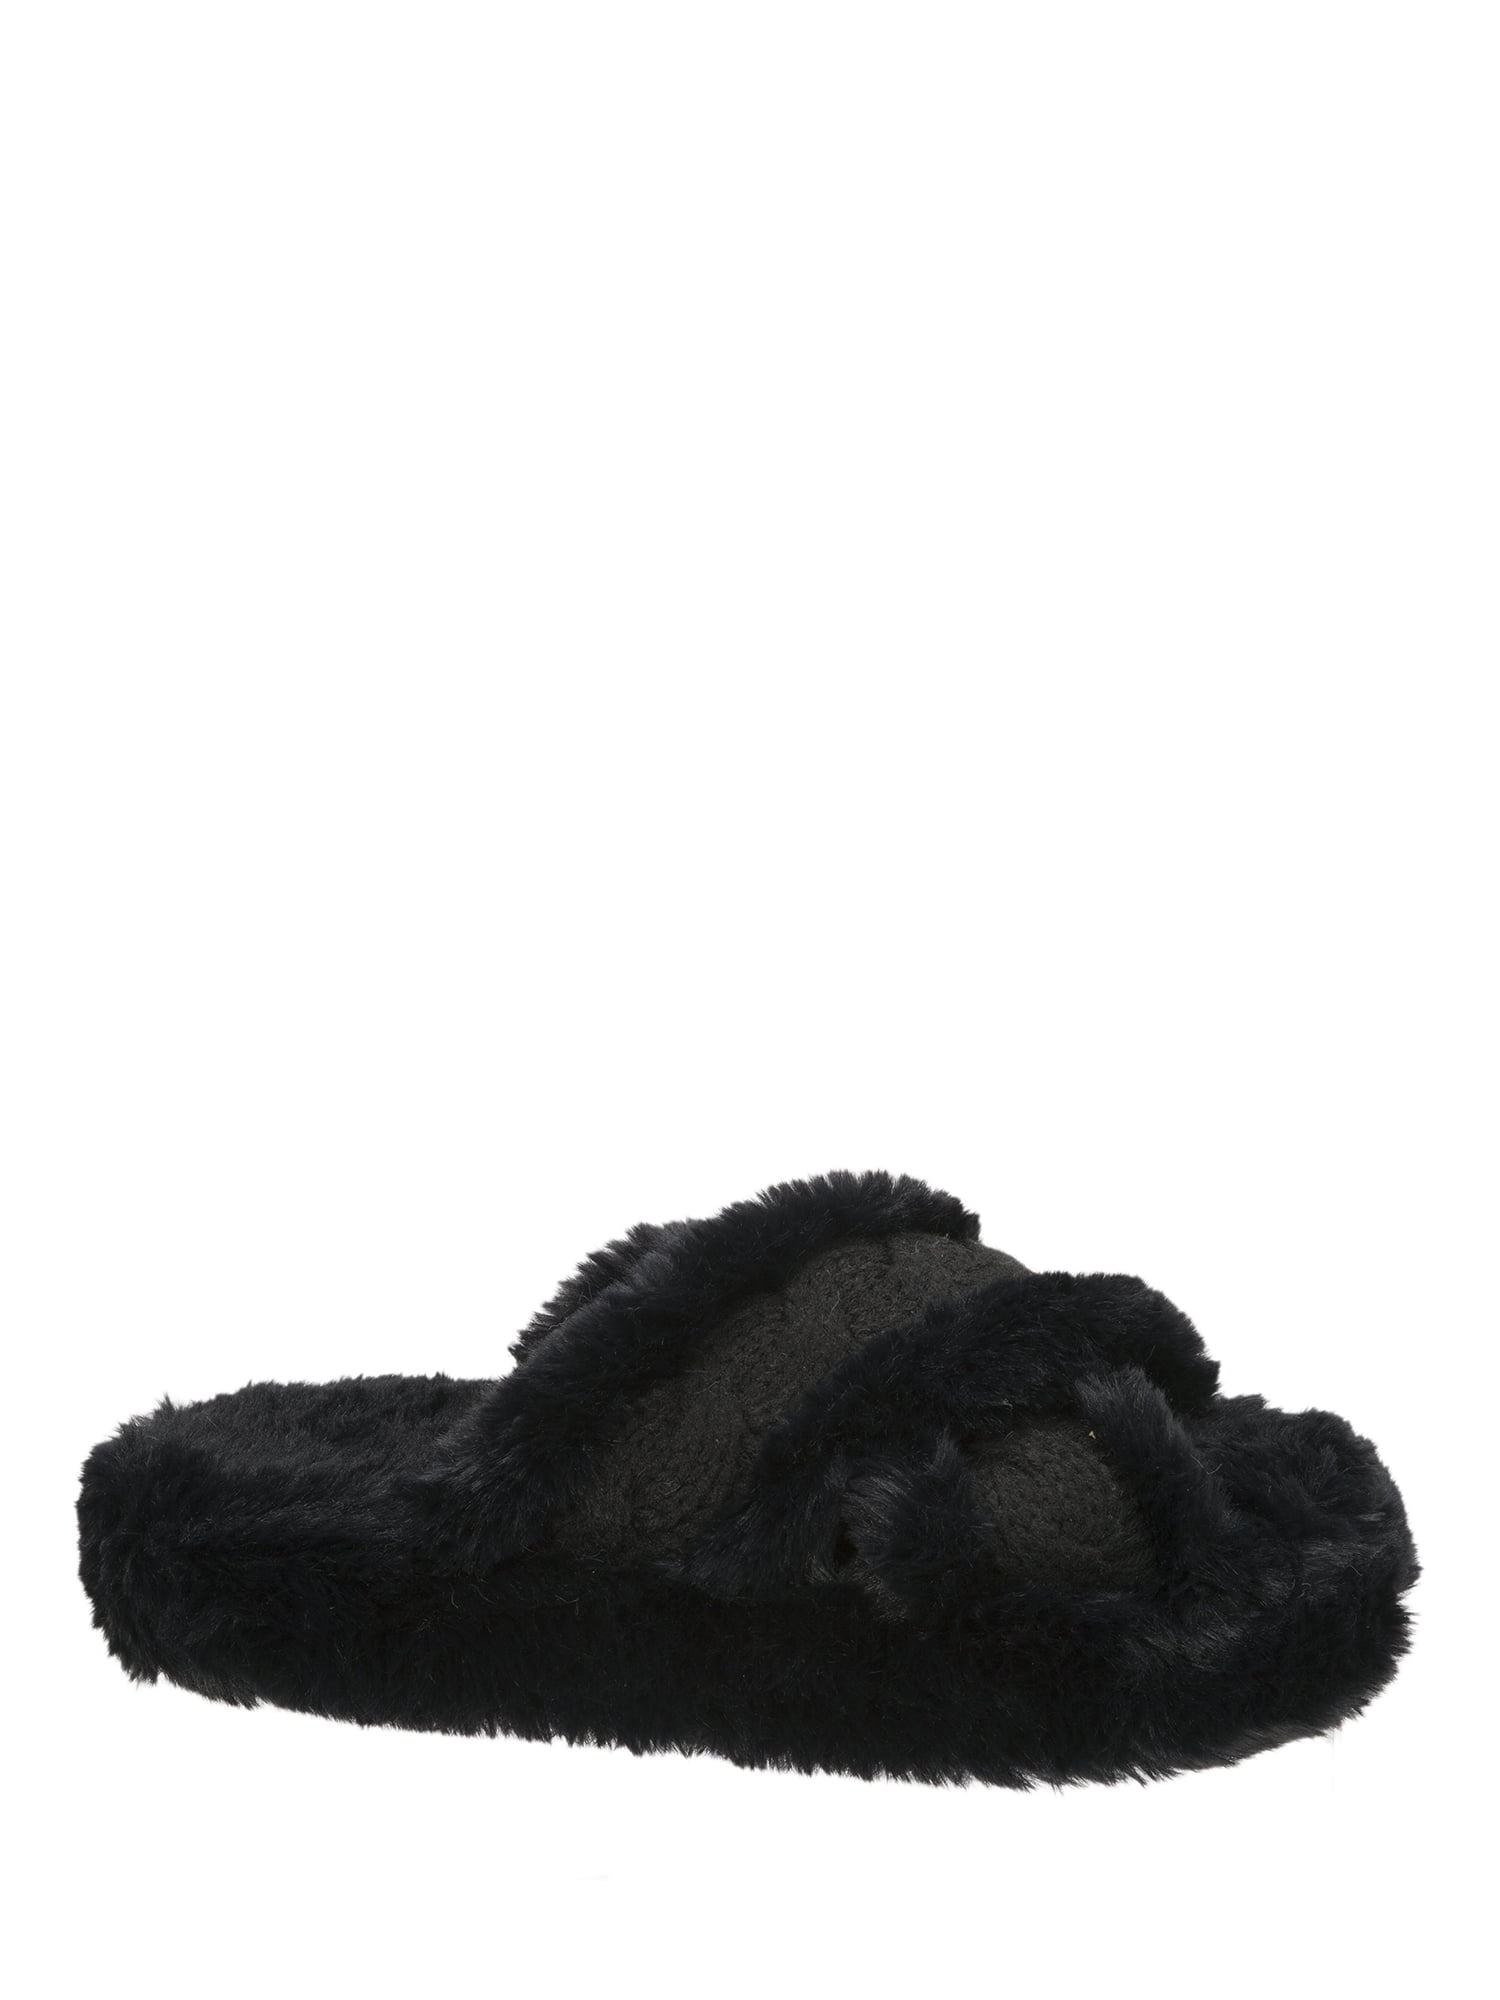 Dearfoams Women's Cable and Pile Crossband Slippers - Walmart.com